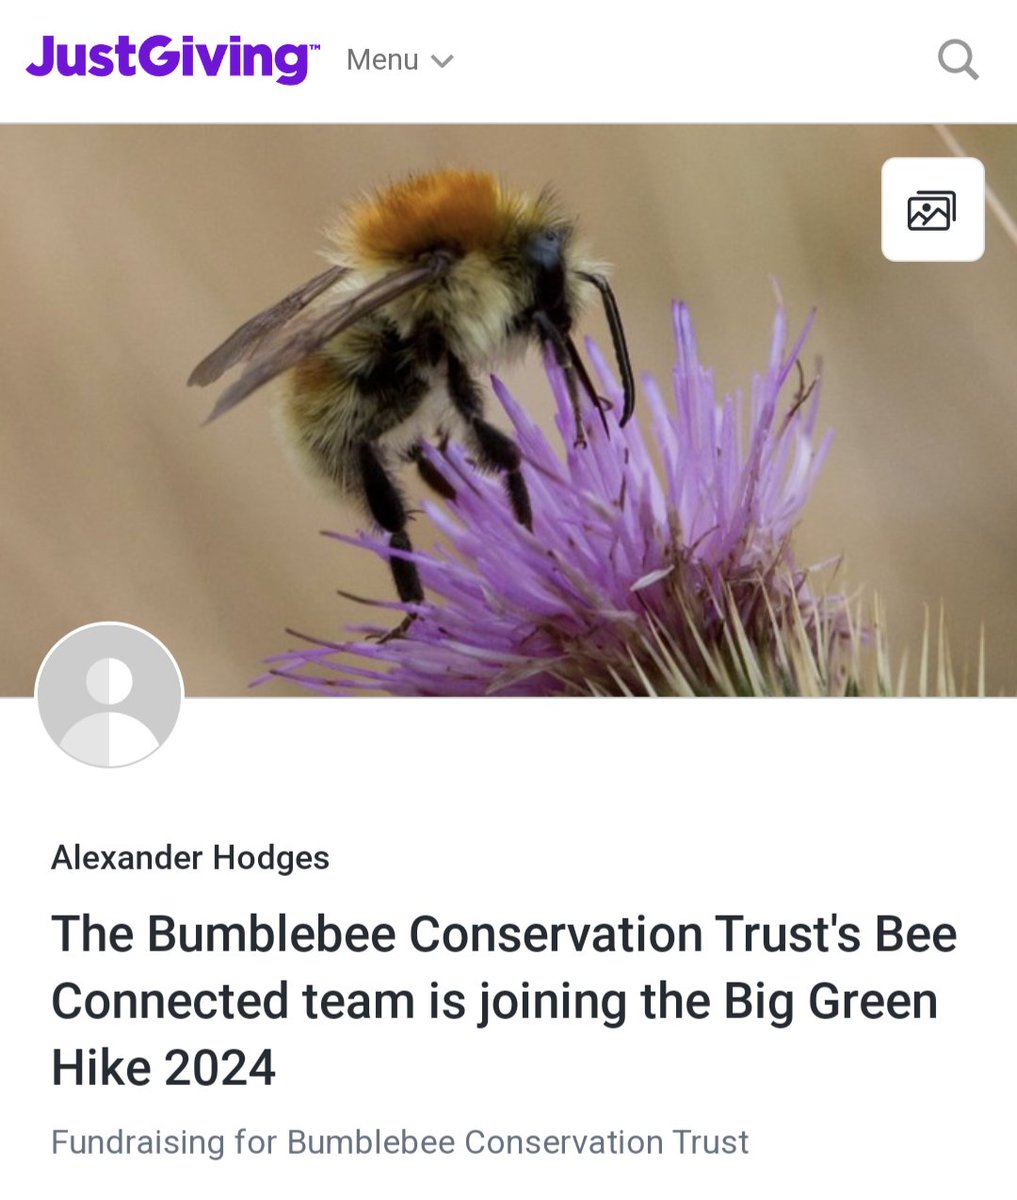 Today we are doing the Big Green Hike to raise money for @BumblebeeTrust ! Our team is walking a collective 70 miles along the Kent-East Sussex coastline and in London. Our Just Giving page will be open for a few more days if you would like to donate!